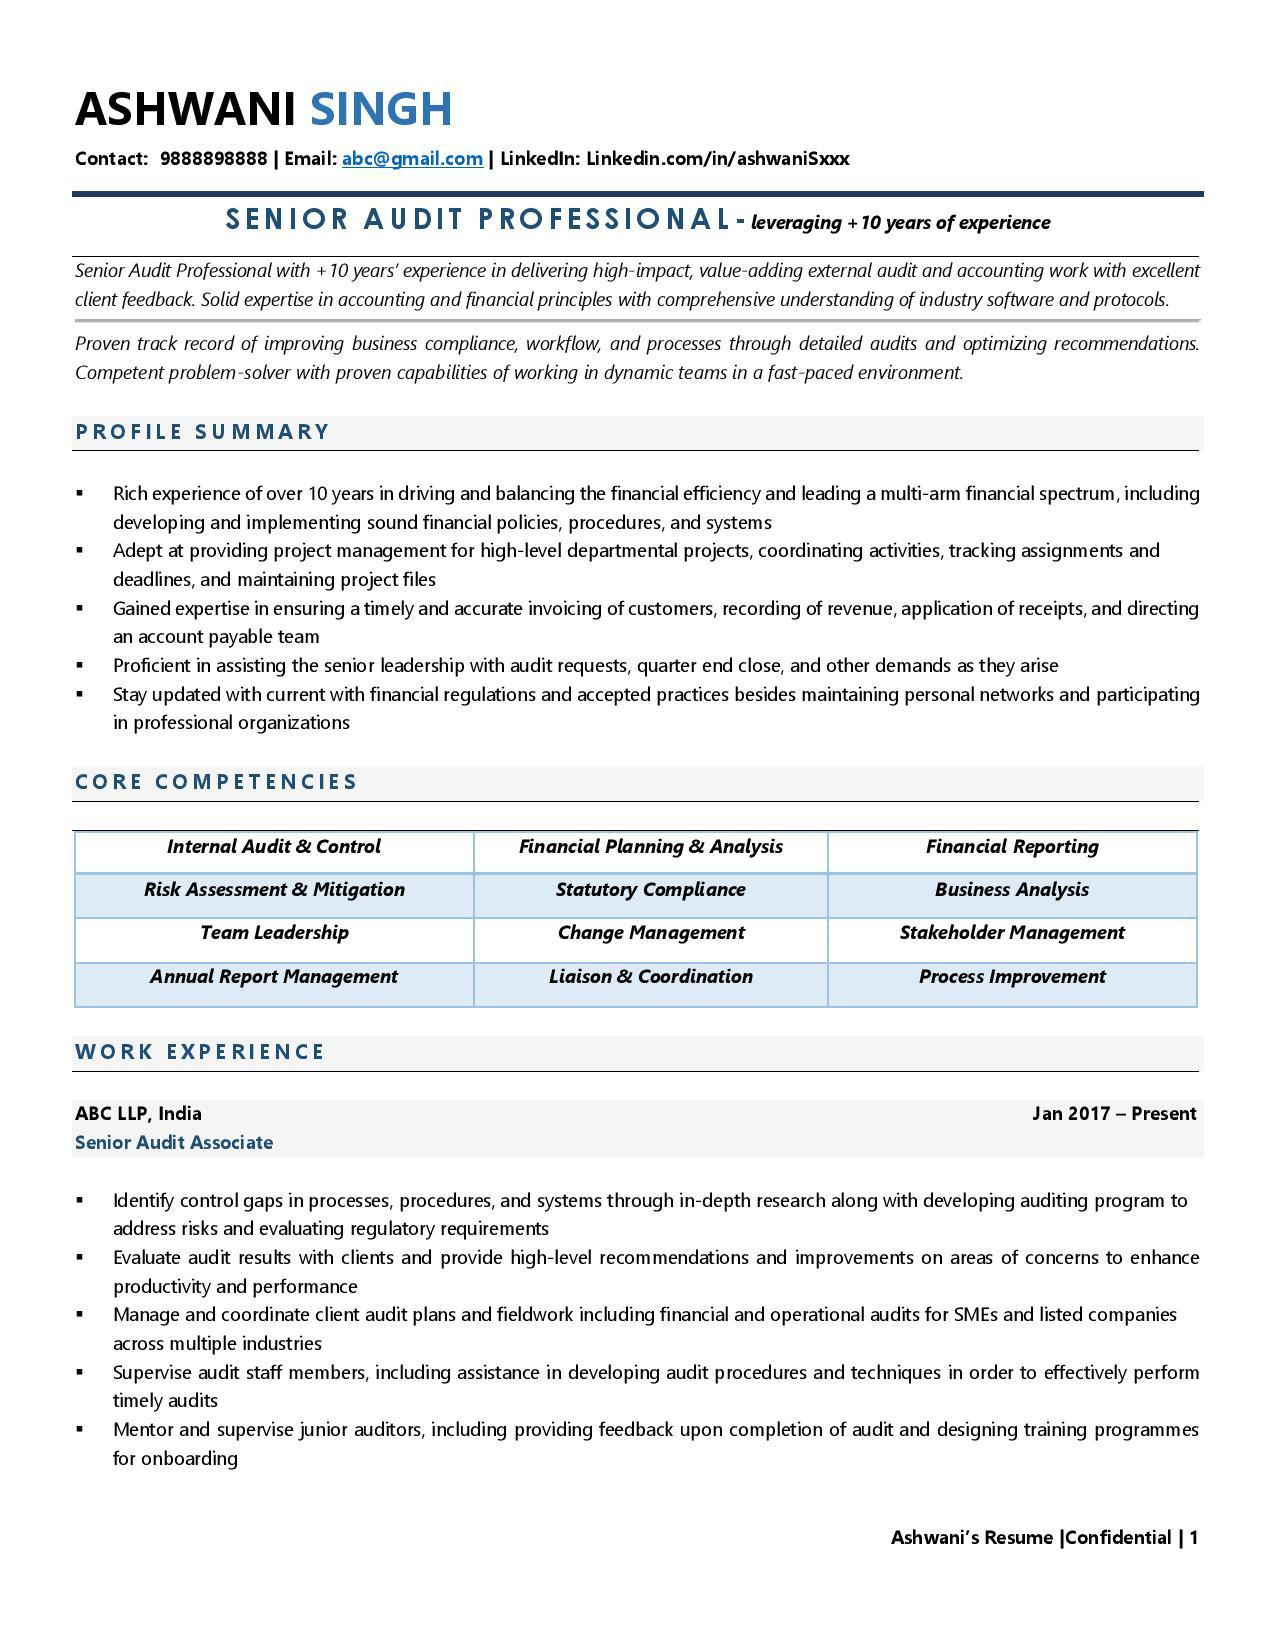 Sample Resume for Junior Internal Auditor Auditor Resume Examples & Template (with Job Winning Tips)